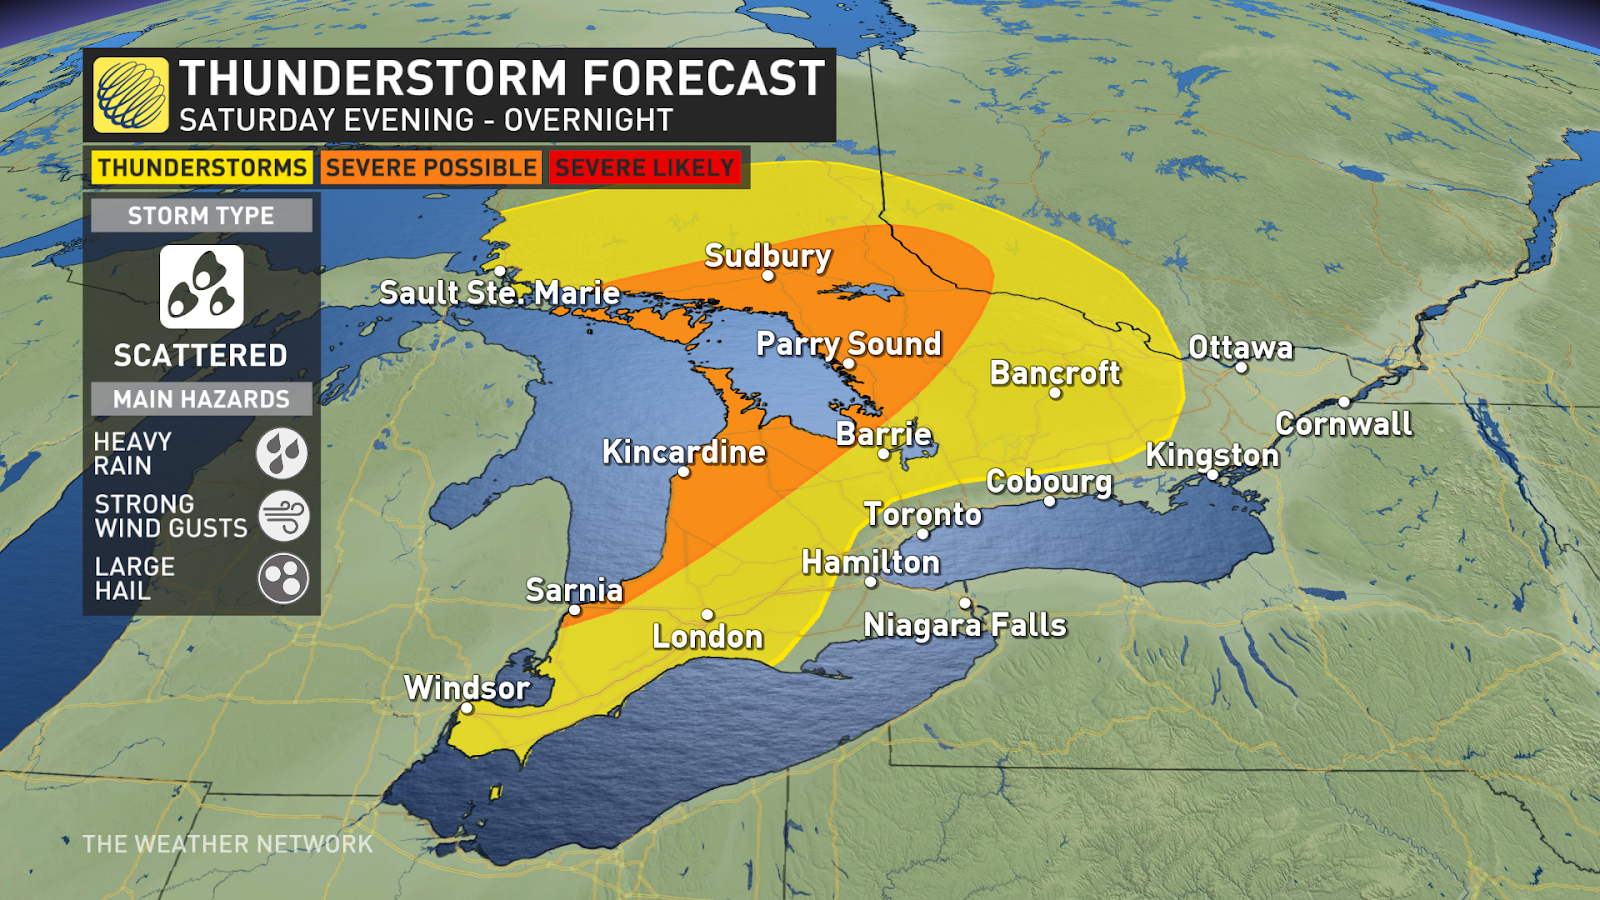 southern ontario faces overnight storm threat, summery sunday